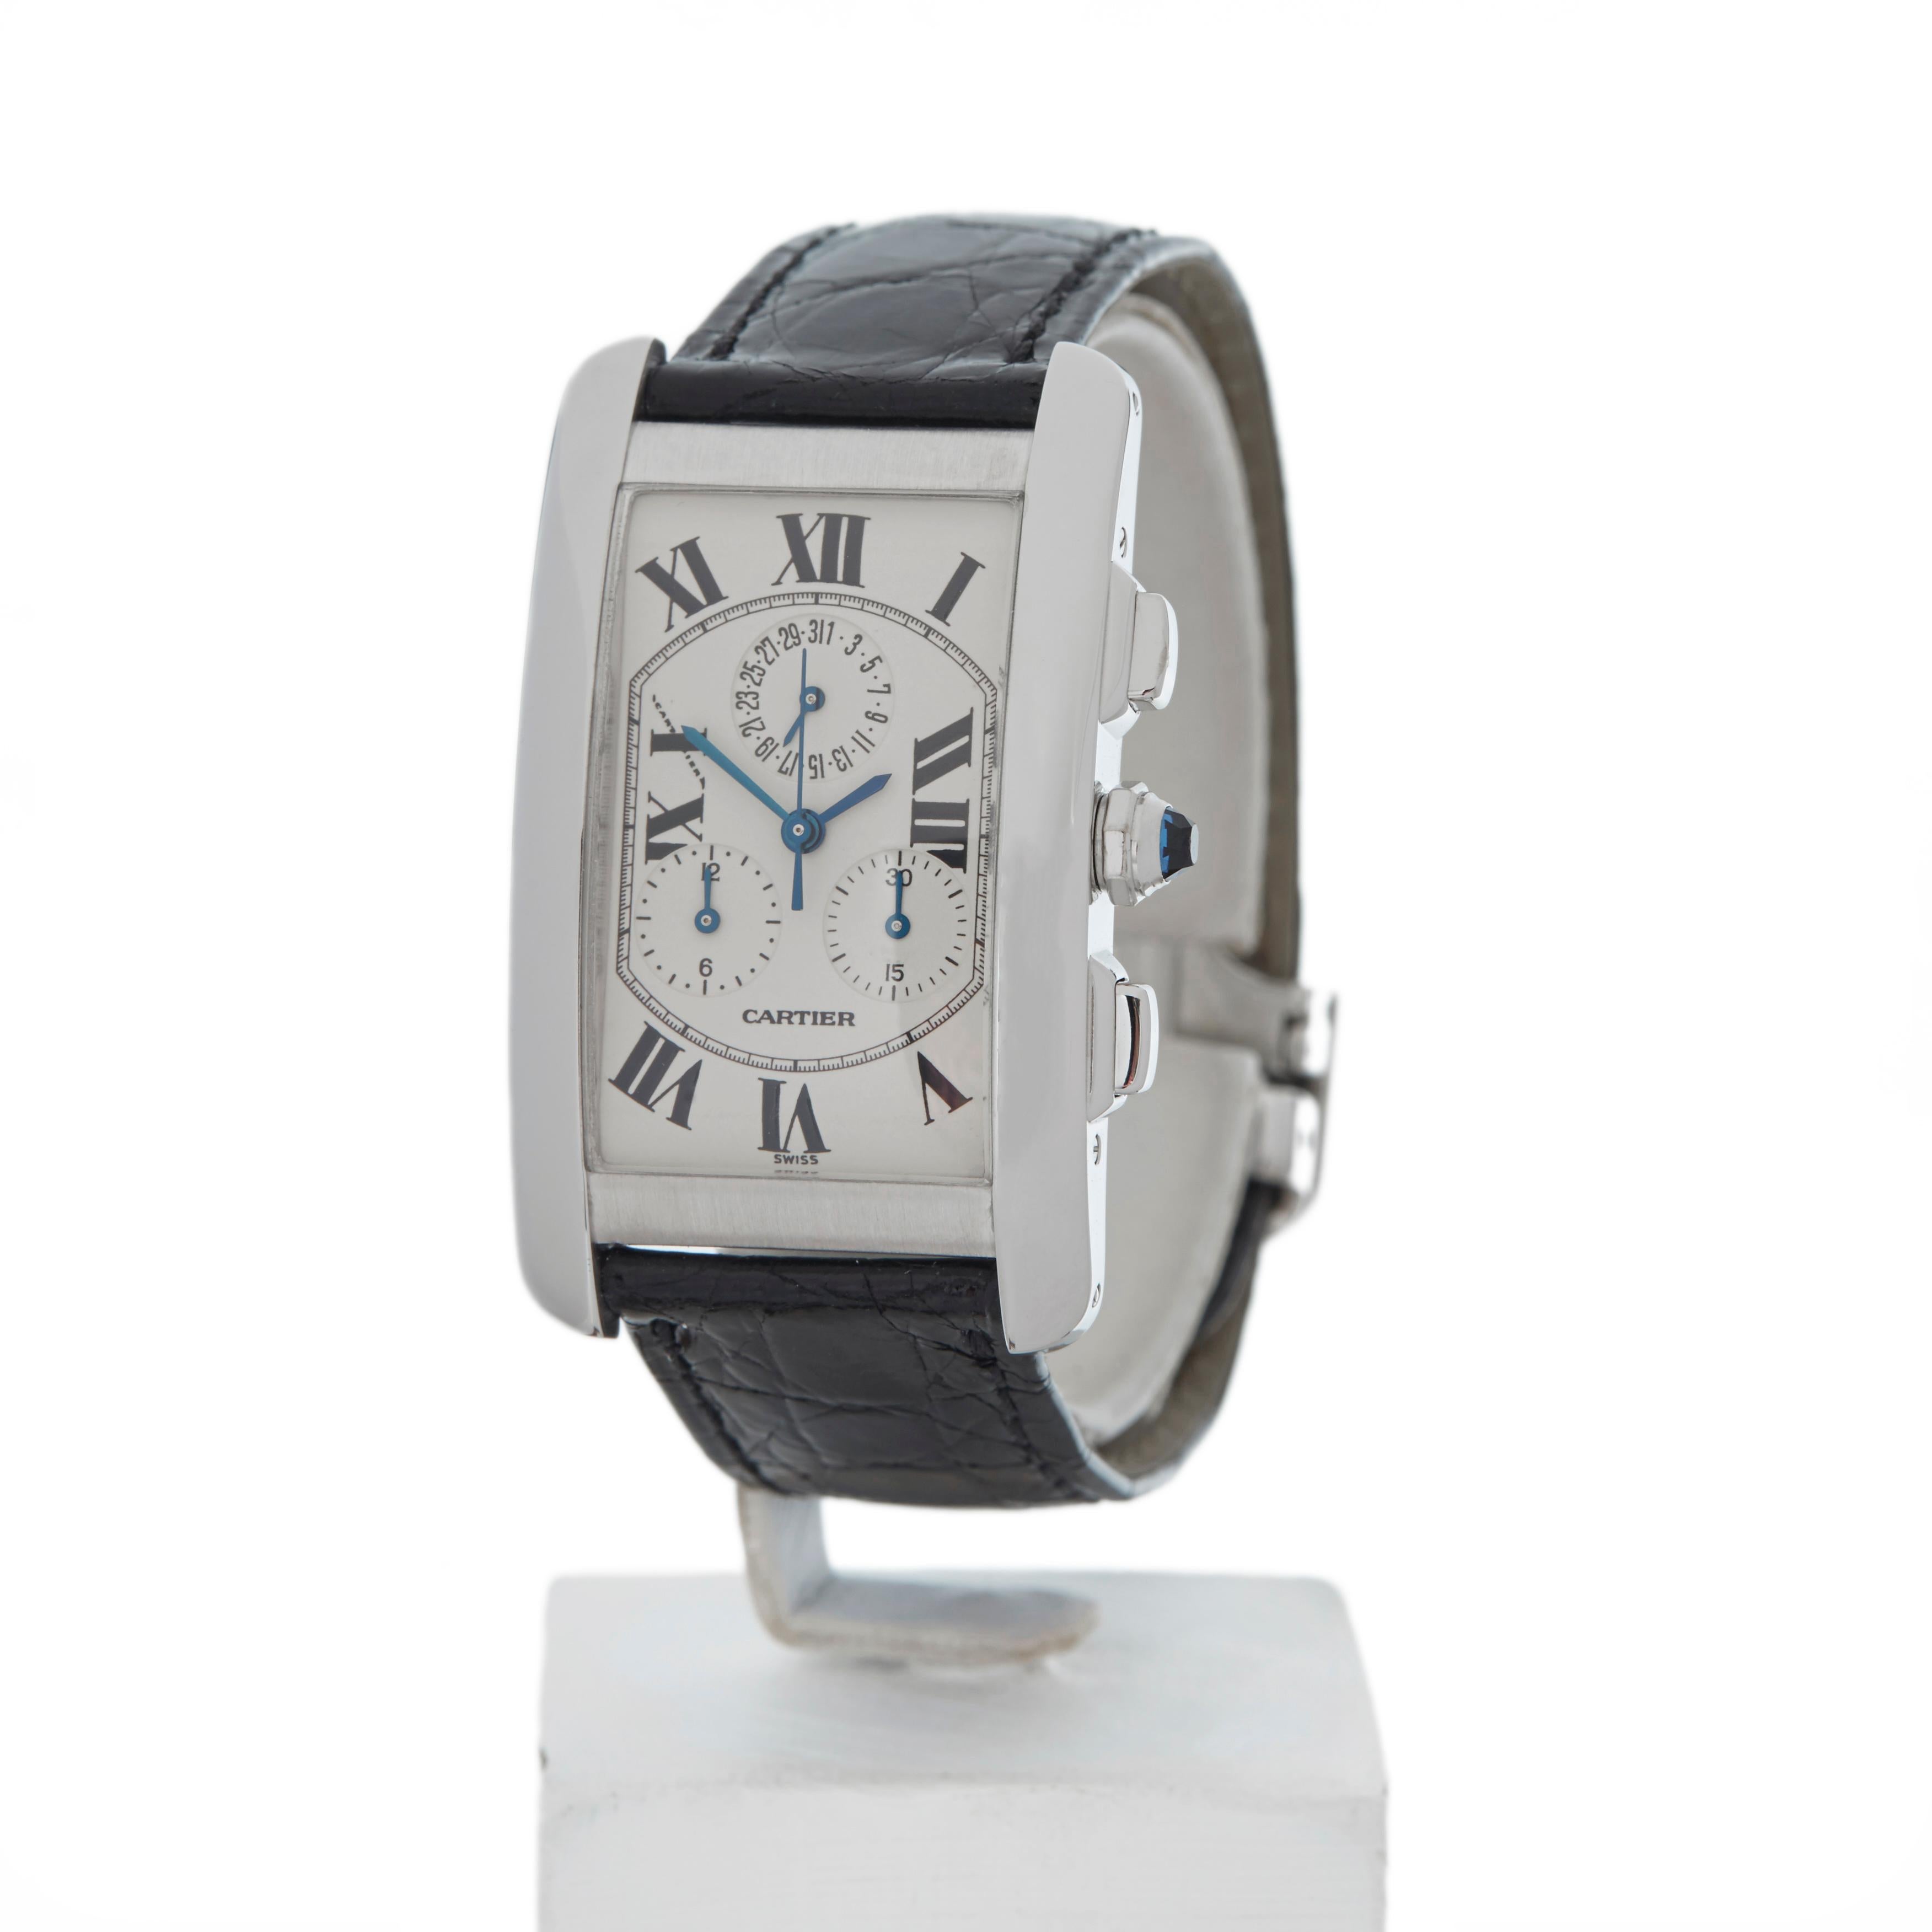 Contemporary 2000s Cartier Tank Americaine White Gold W2603356 Wristwatch
 *
 *Complete with: Box Only dated 2000s
 *Case Size: 26mm
 *Strap: Black Crocodile Leather
 *Age: 2000's
 *Strap length: Adjustable up to 18cm. Please note we can order spare